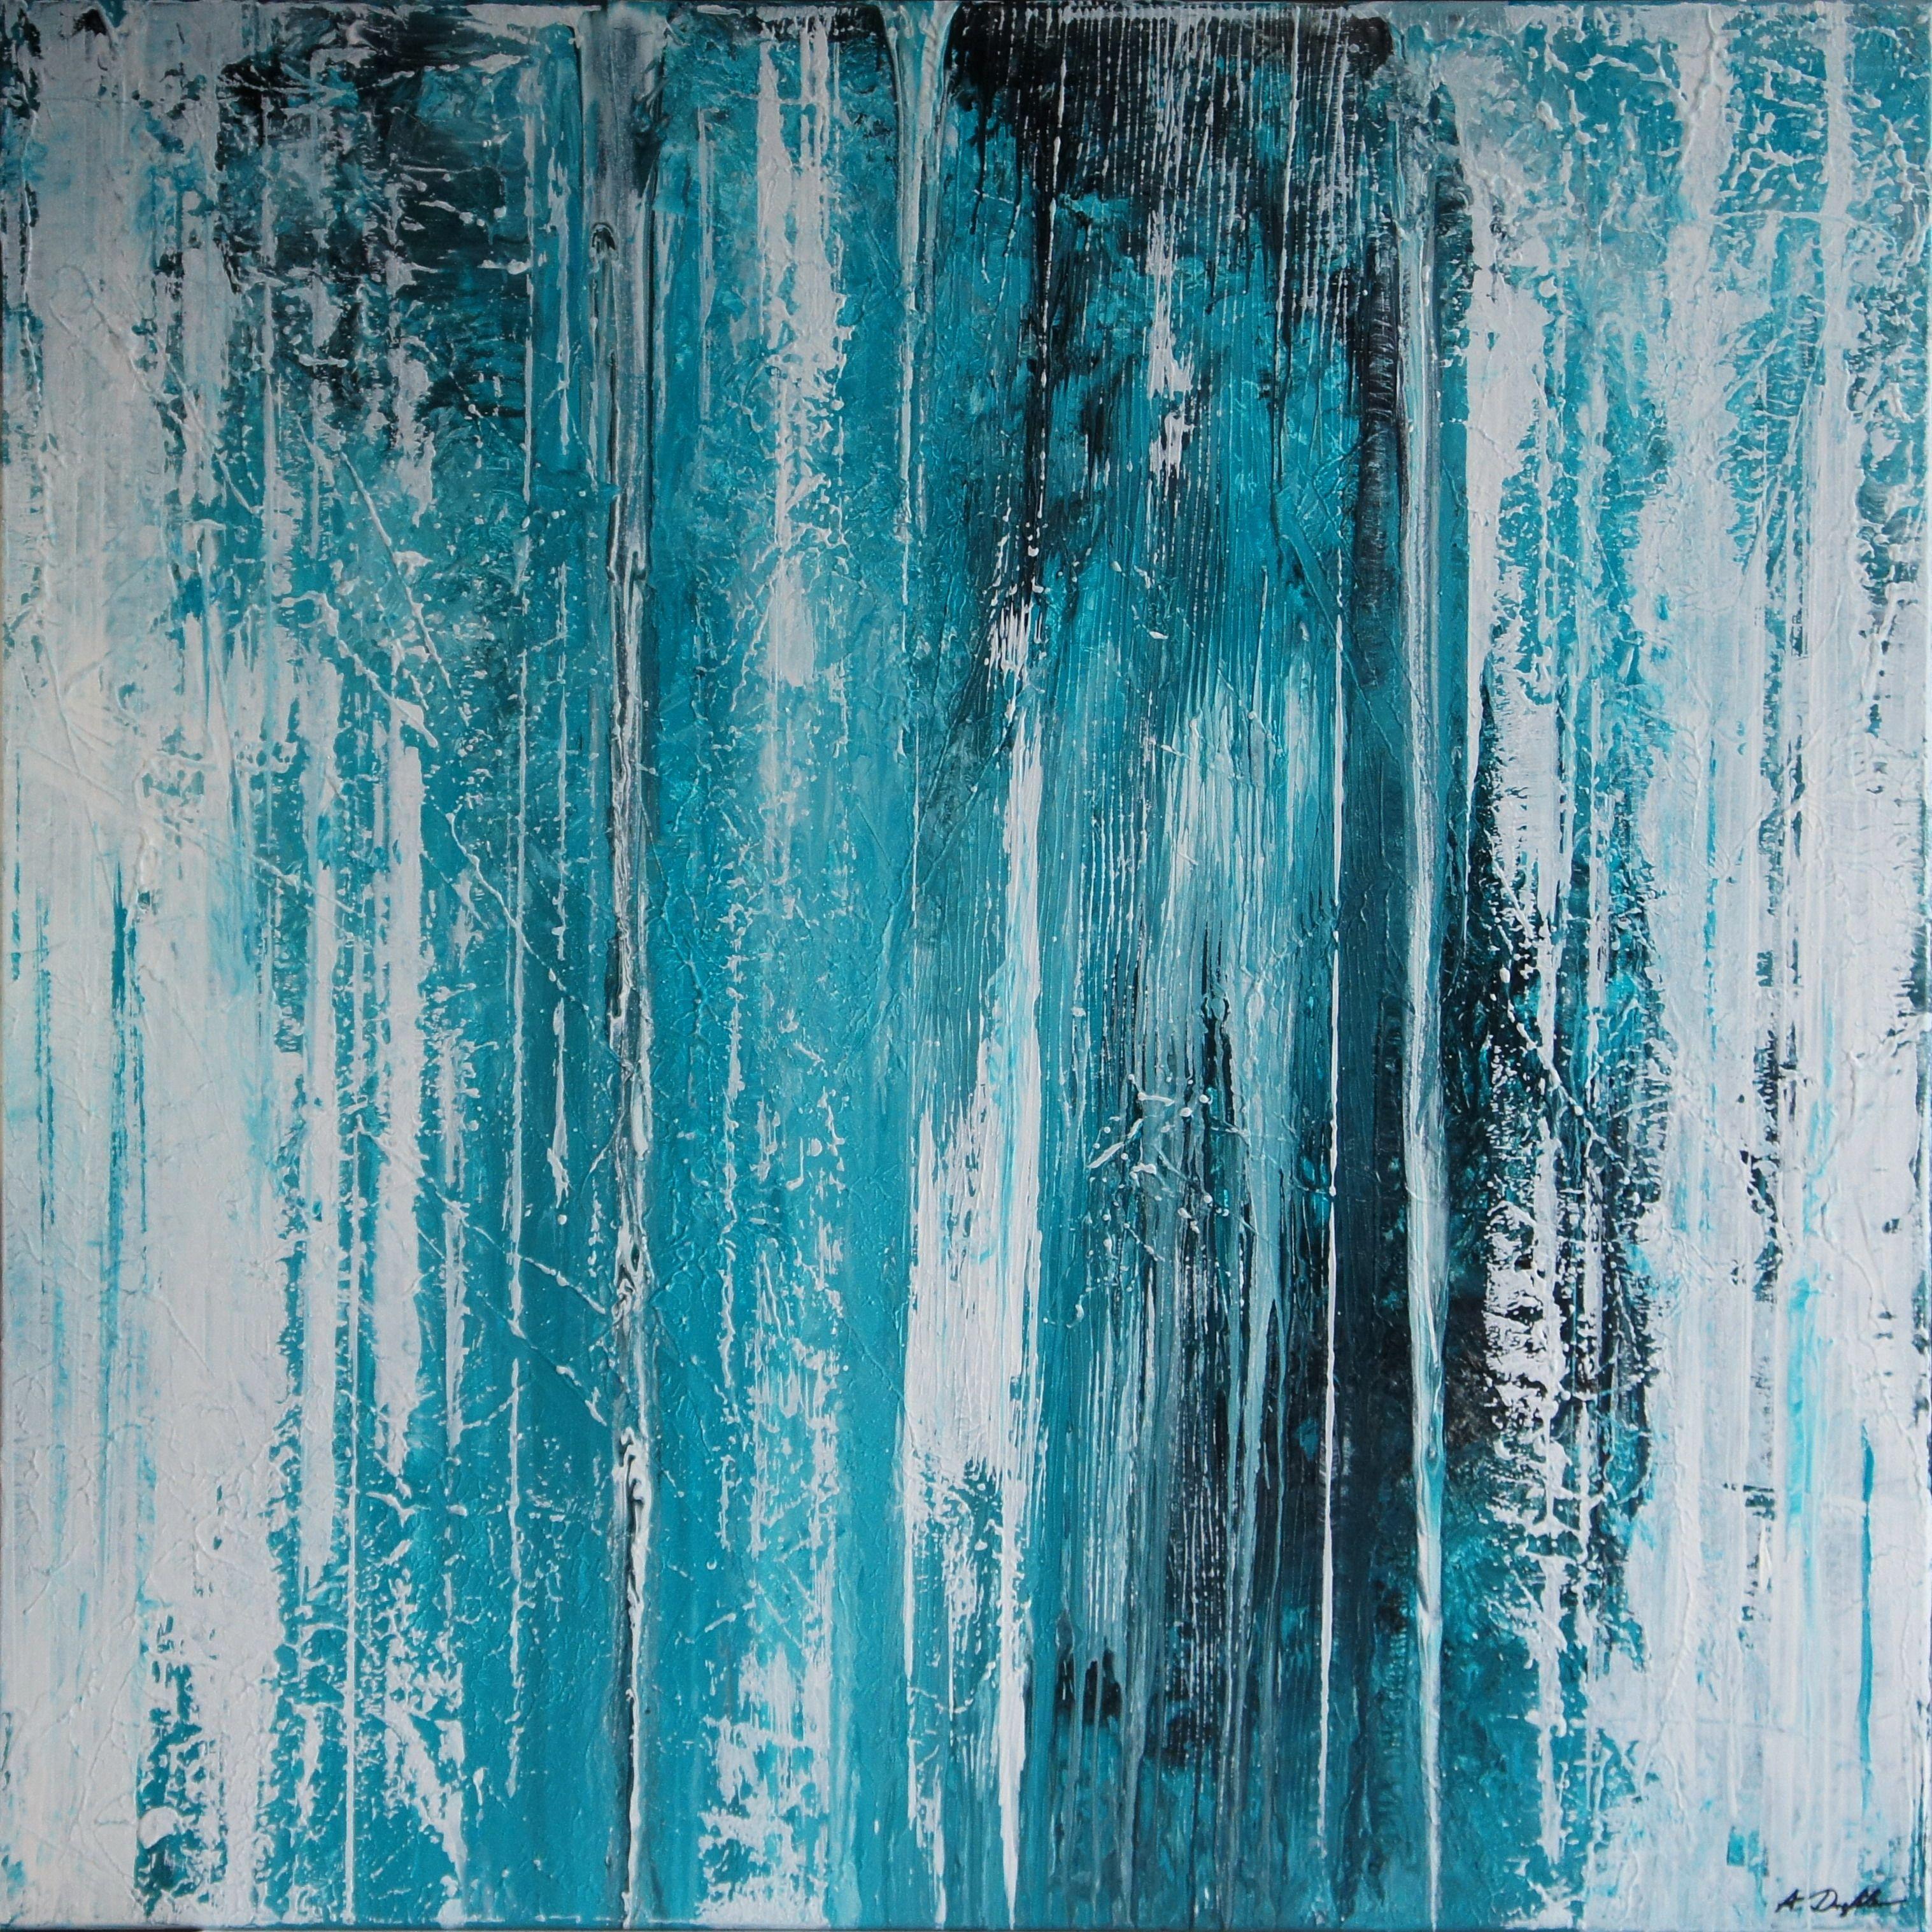 Ansgar Dressler Abstract Painting - Amazonite Revealed II, Painting, Acrylic on Canvas